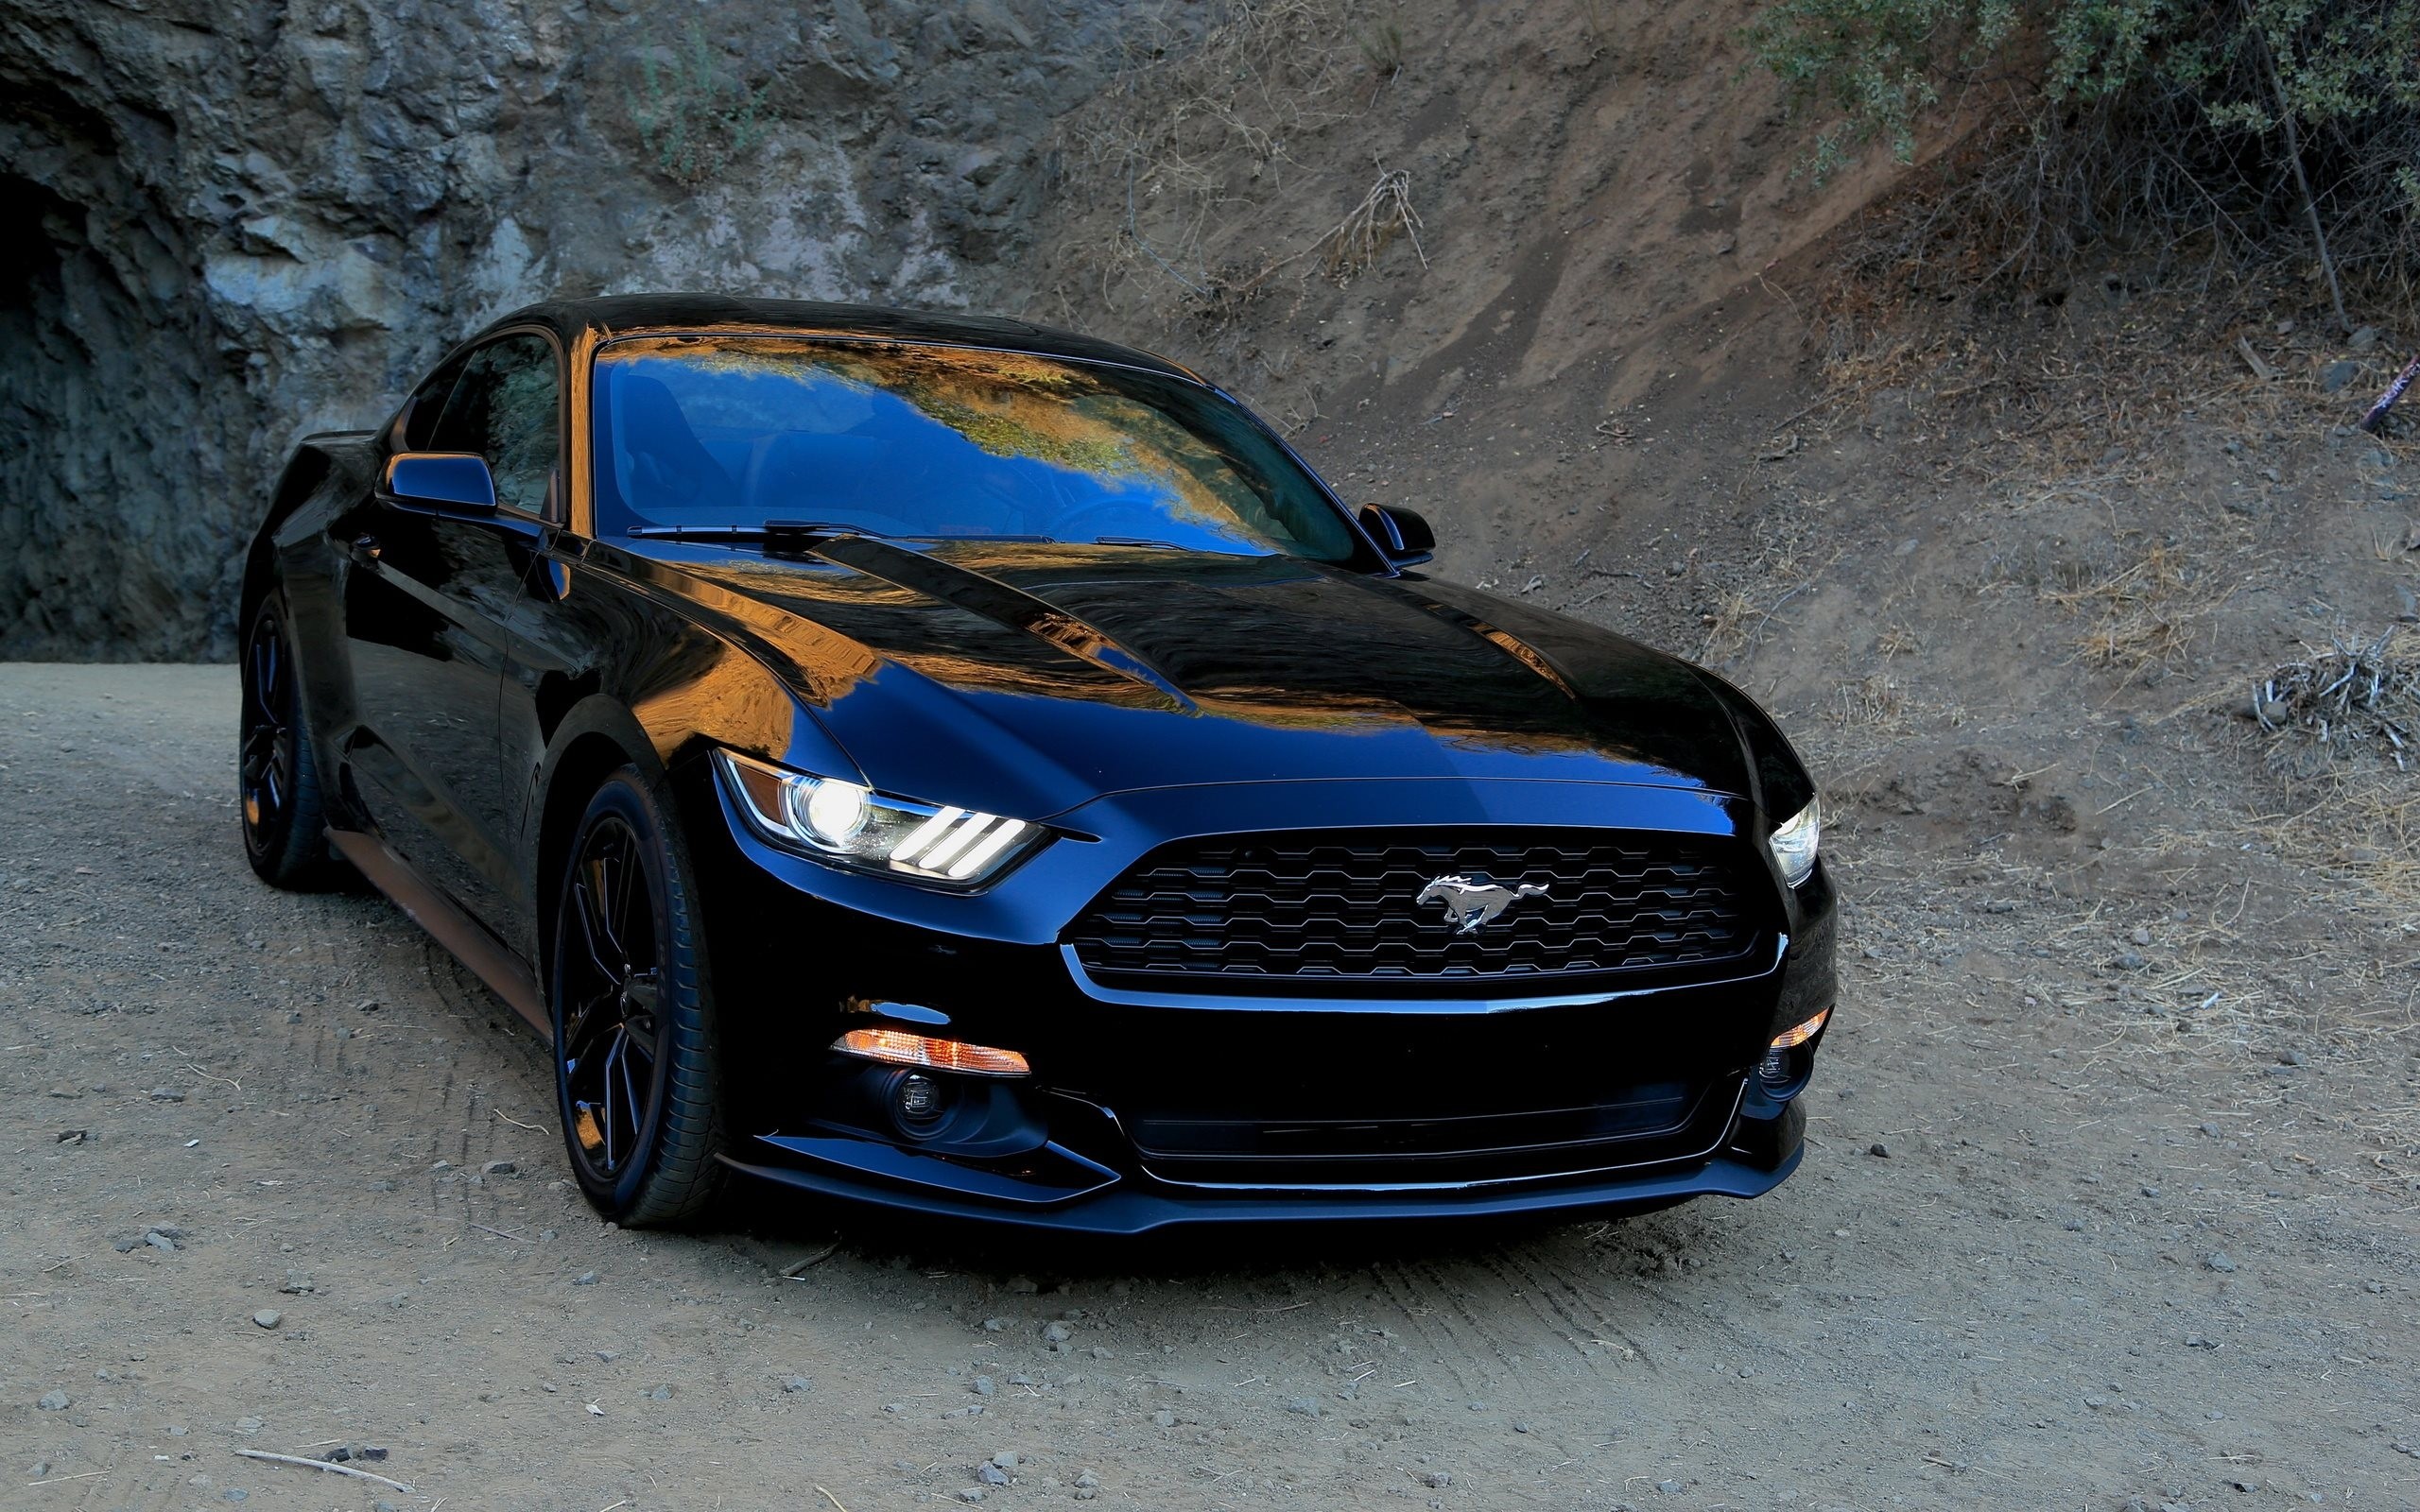 HD for desktop 1080p Ford 